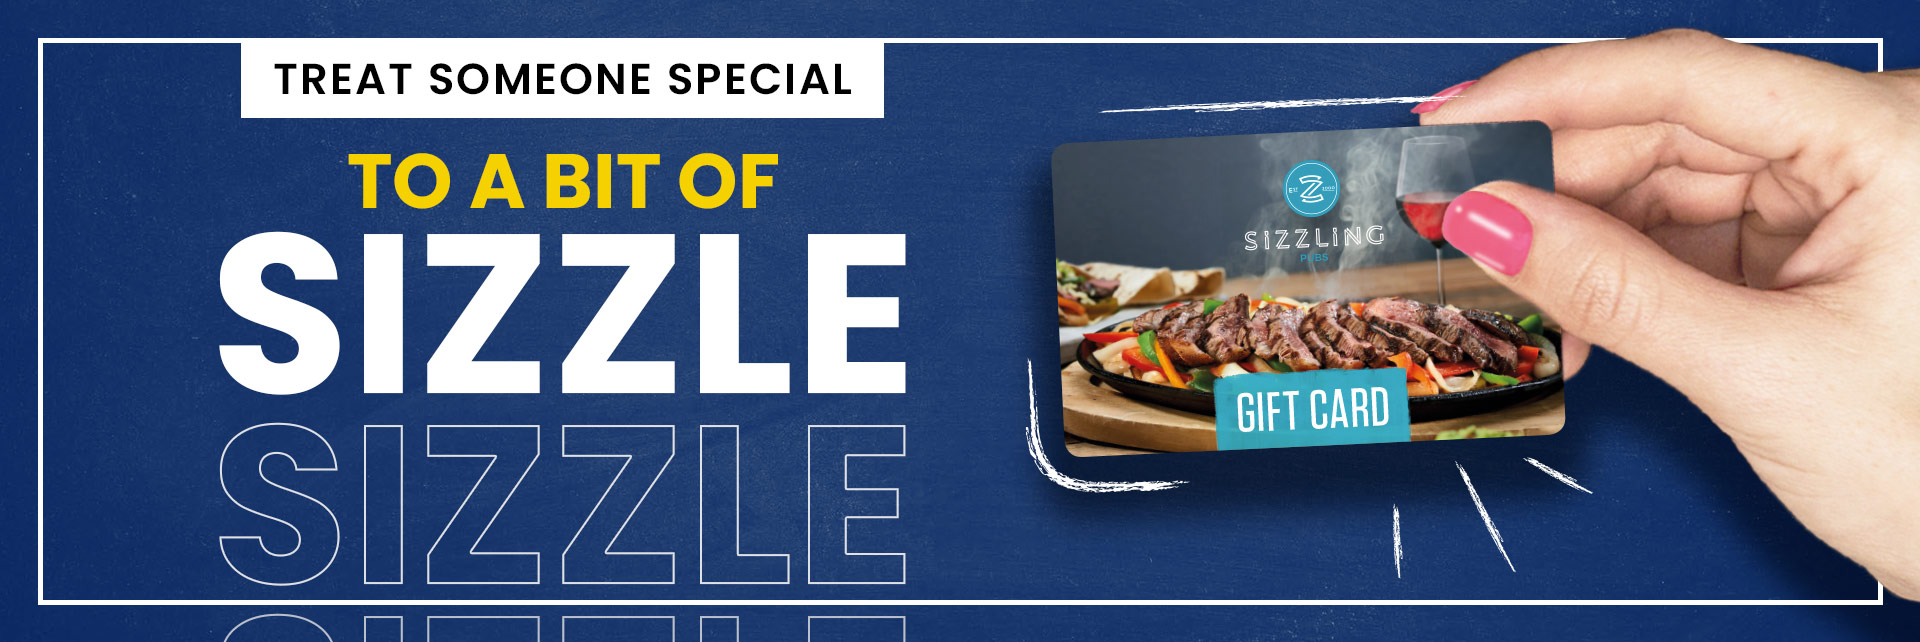 Sizzling Pubs Gift Card at The Springcroft in Glasgow